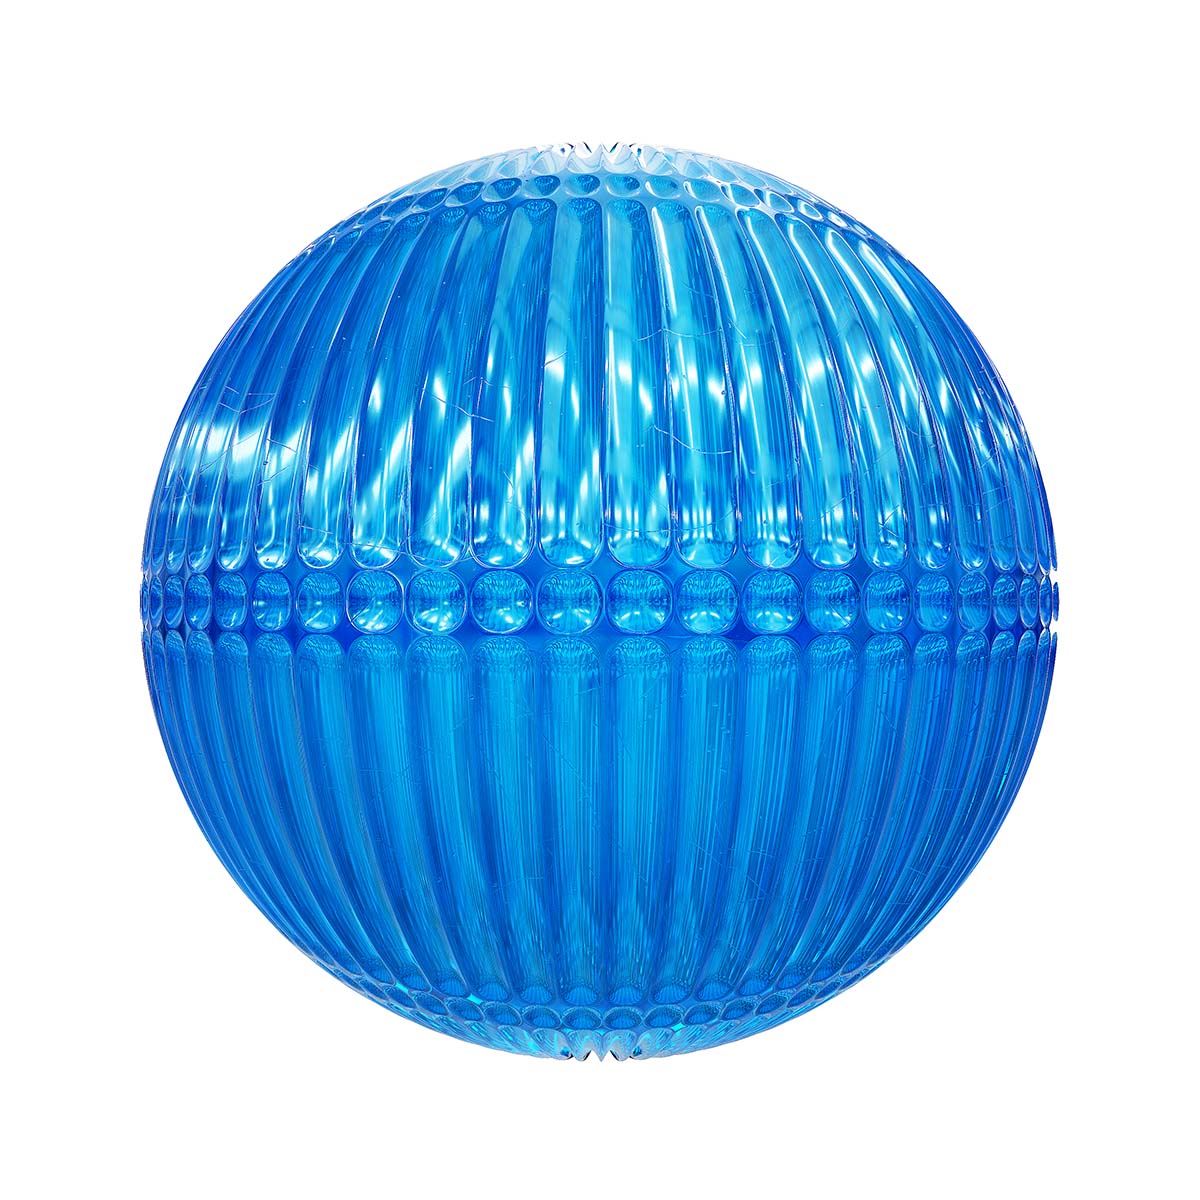 Blue Patterned Glass PBR Texture